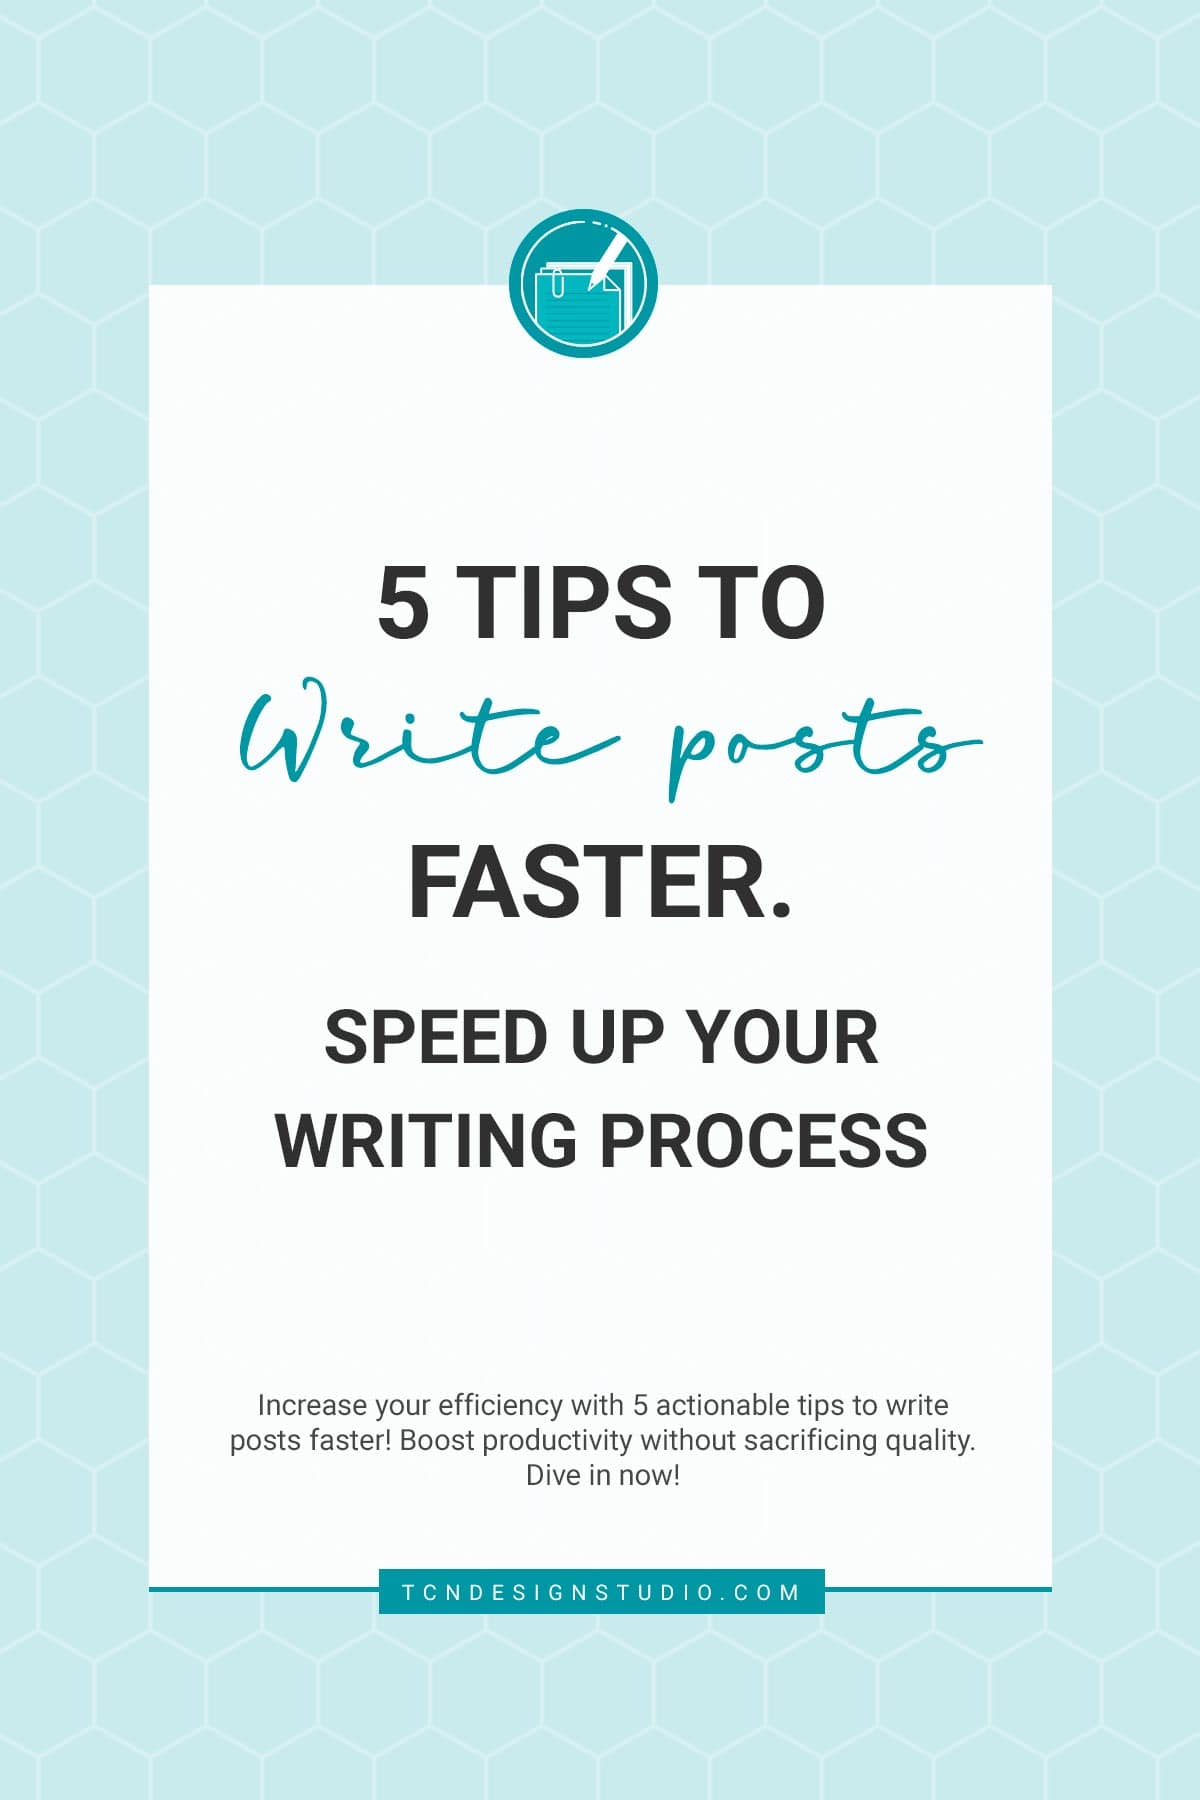 5 Tips to Write Posts Faster. Speed Up Your Writing Process